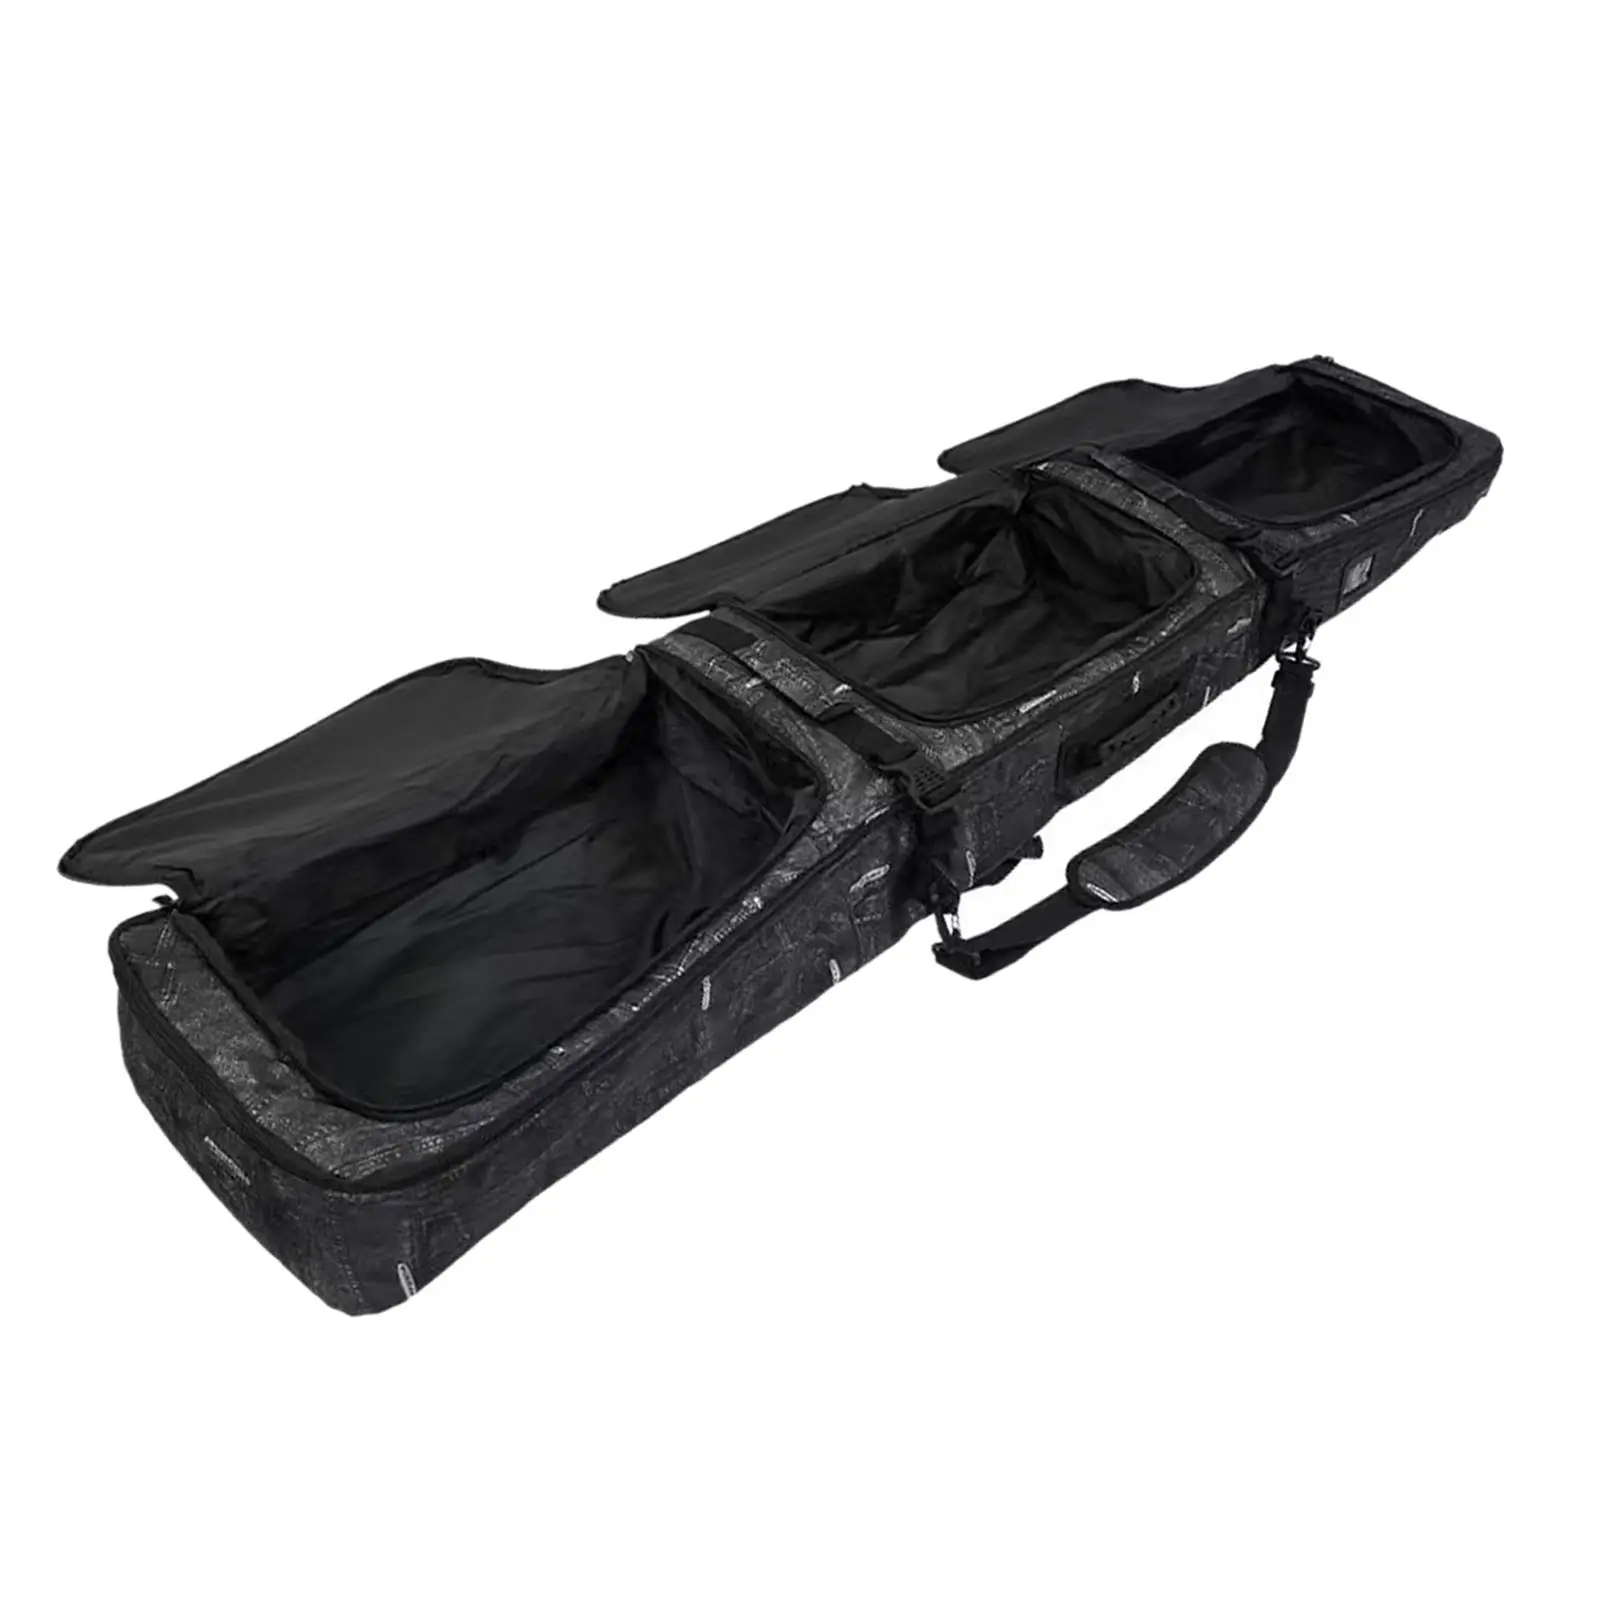 Snowboard Bag with Wheels Snowboard Travel Bags for Flying Waterproof for Women Men Transport Snowboarding Boards Winter Gloves